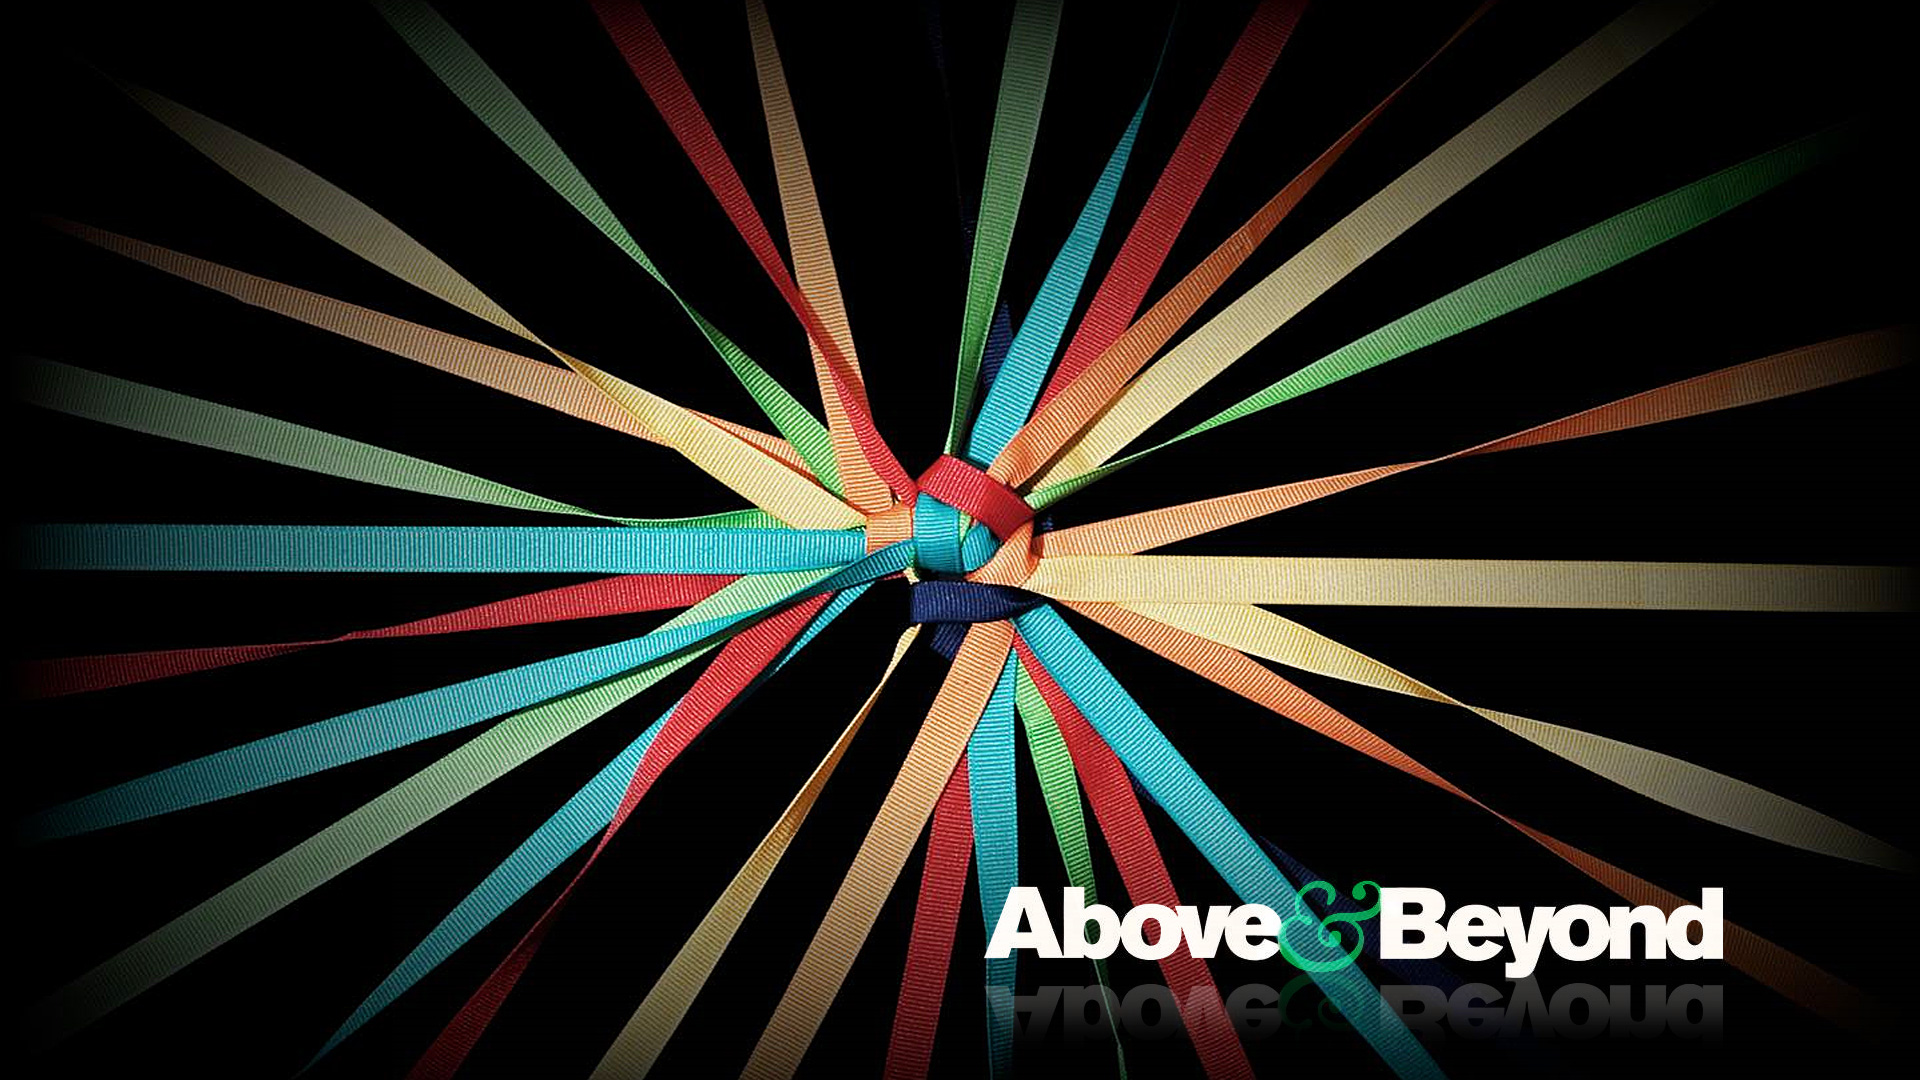 above and beyond wallpaper,light,colorfulness,graphic design,graphics,symmetry